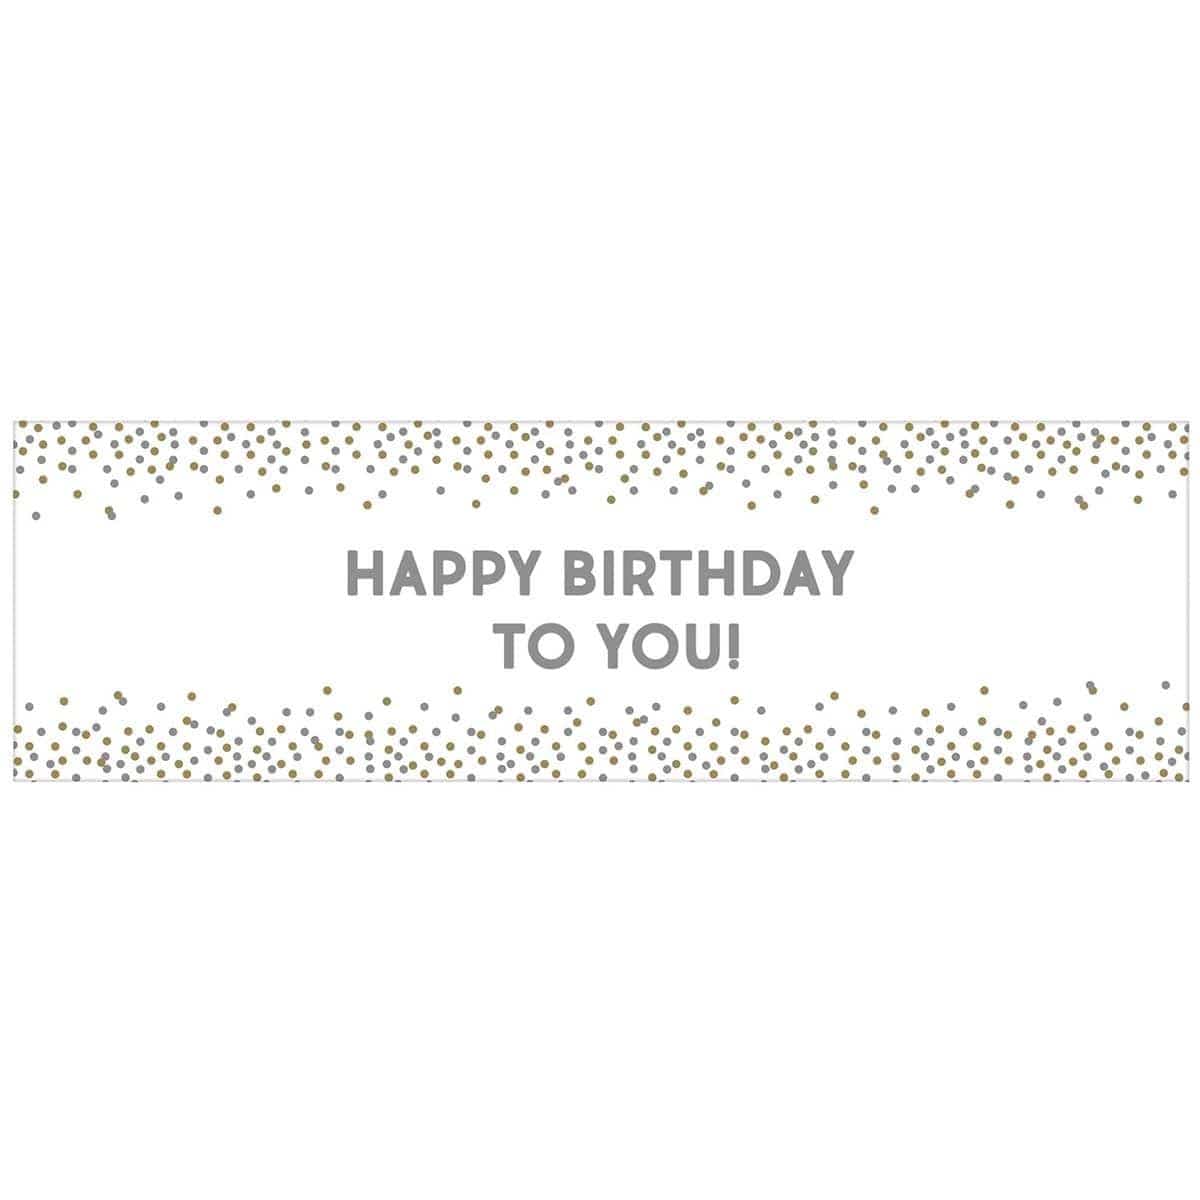 Buy General Birthday Giant Custom. Banner sold at Party Expert